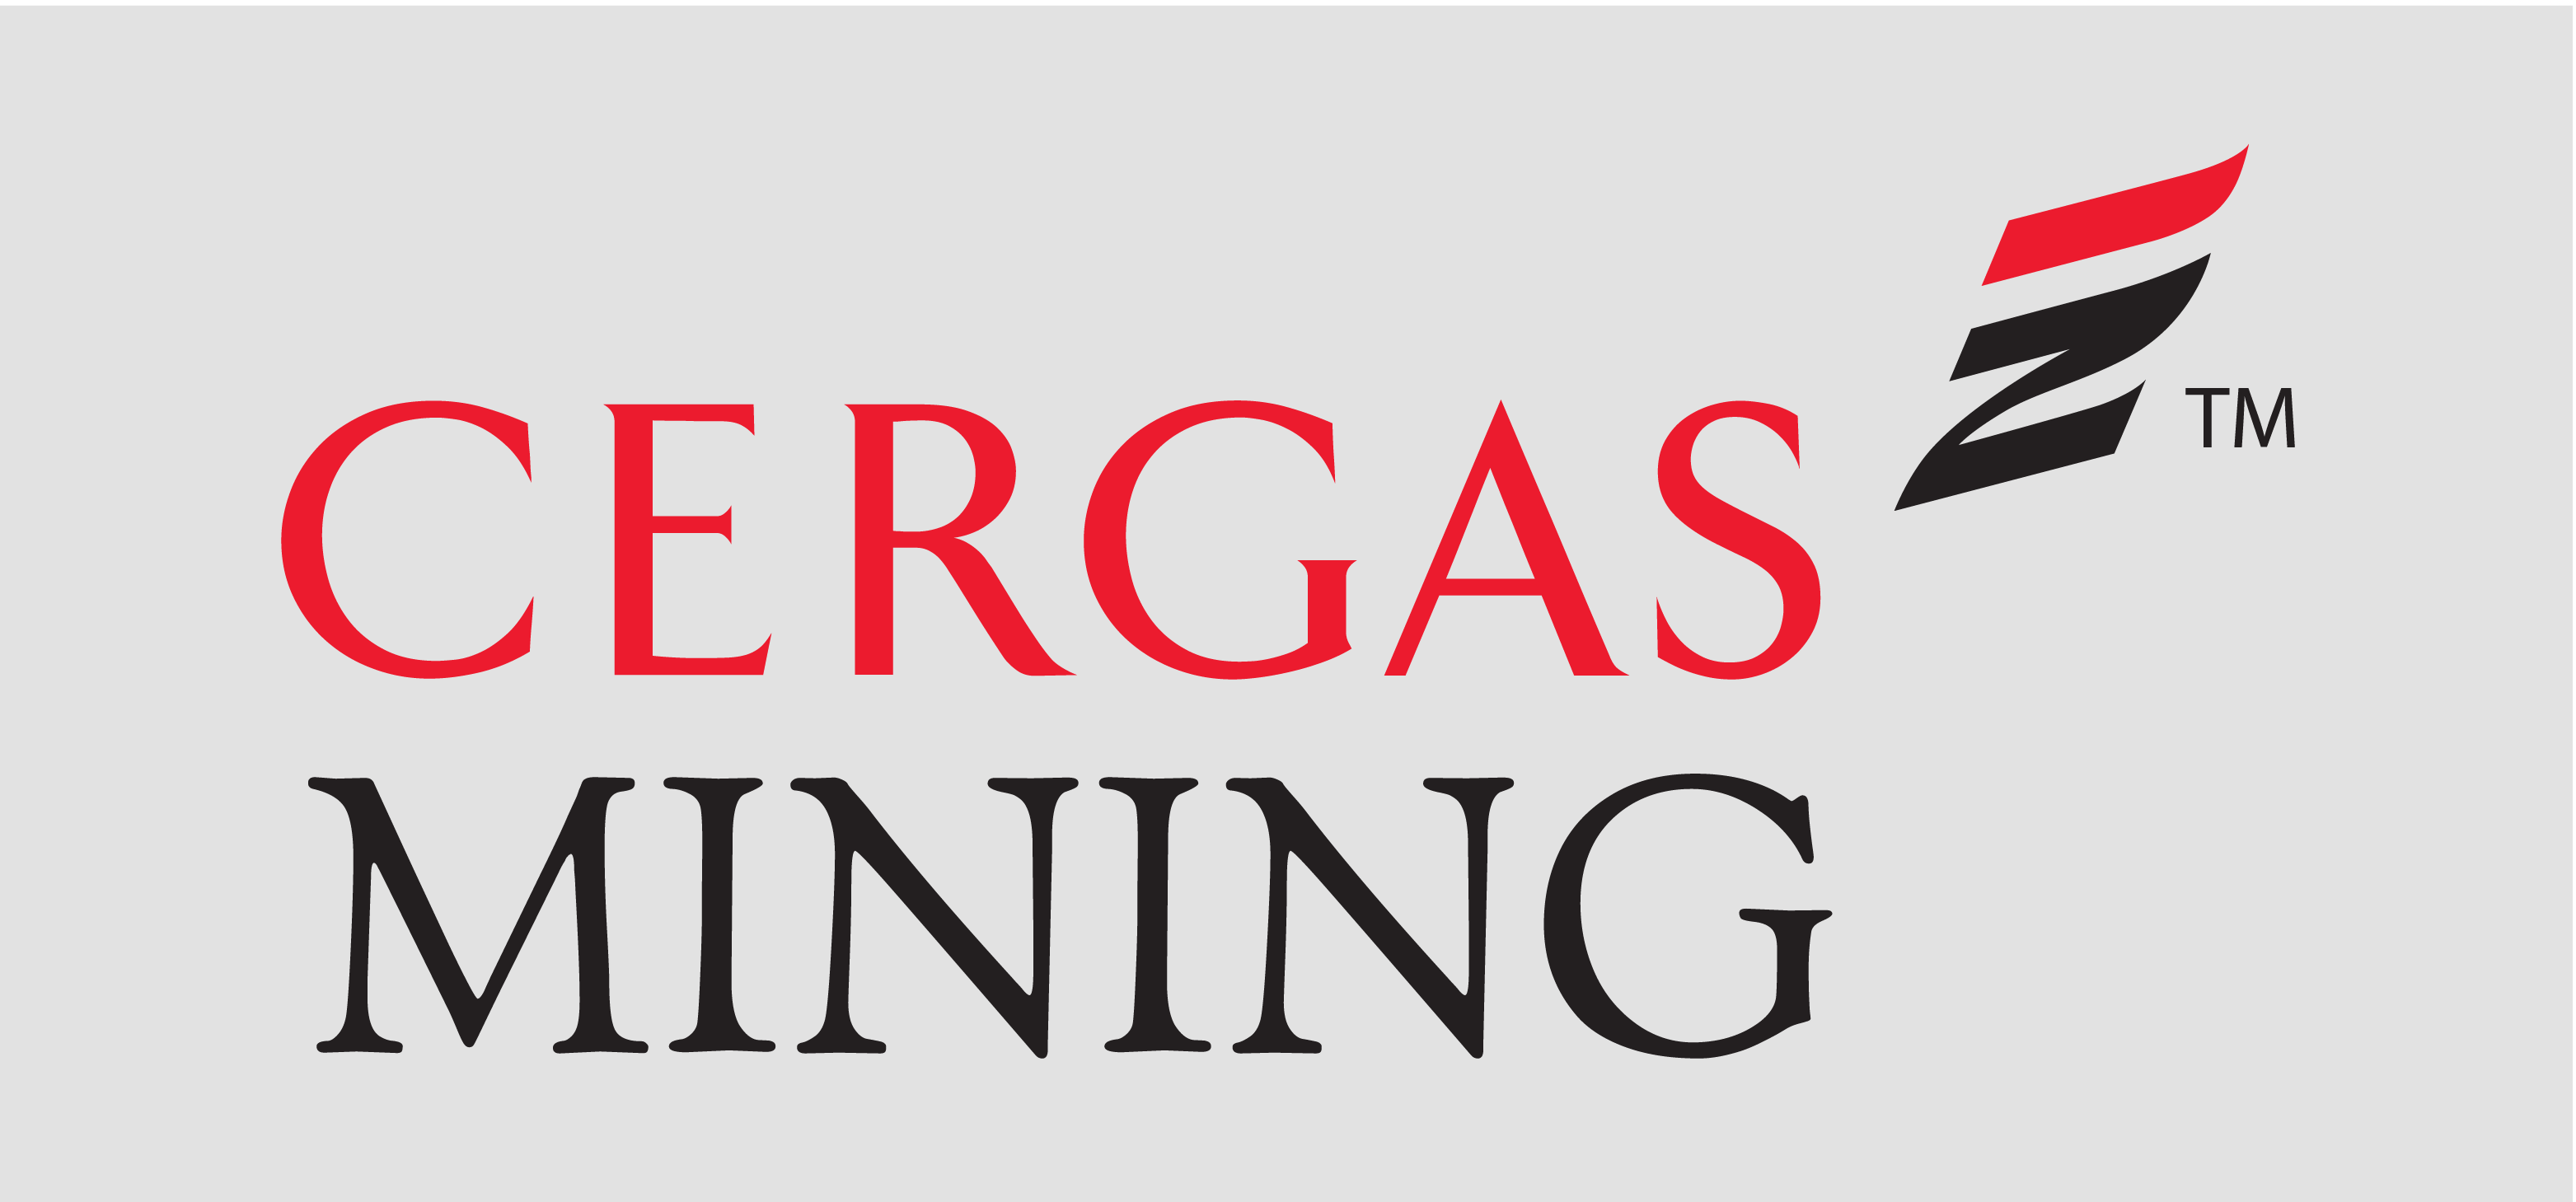 //cergasglobal.com/wp-content/uploads/2020/02/Our-Approach-Mining-Logo.png